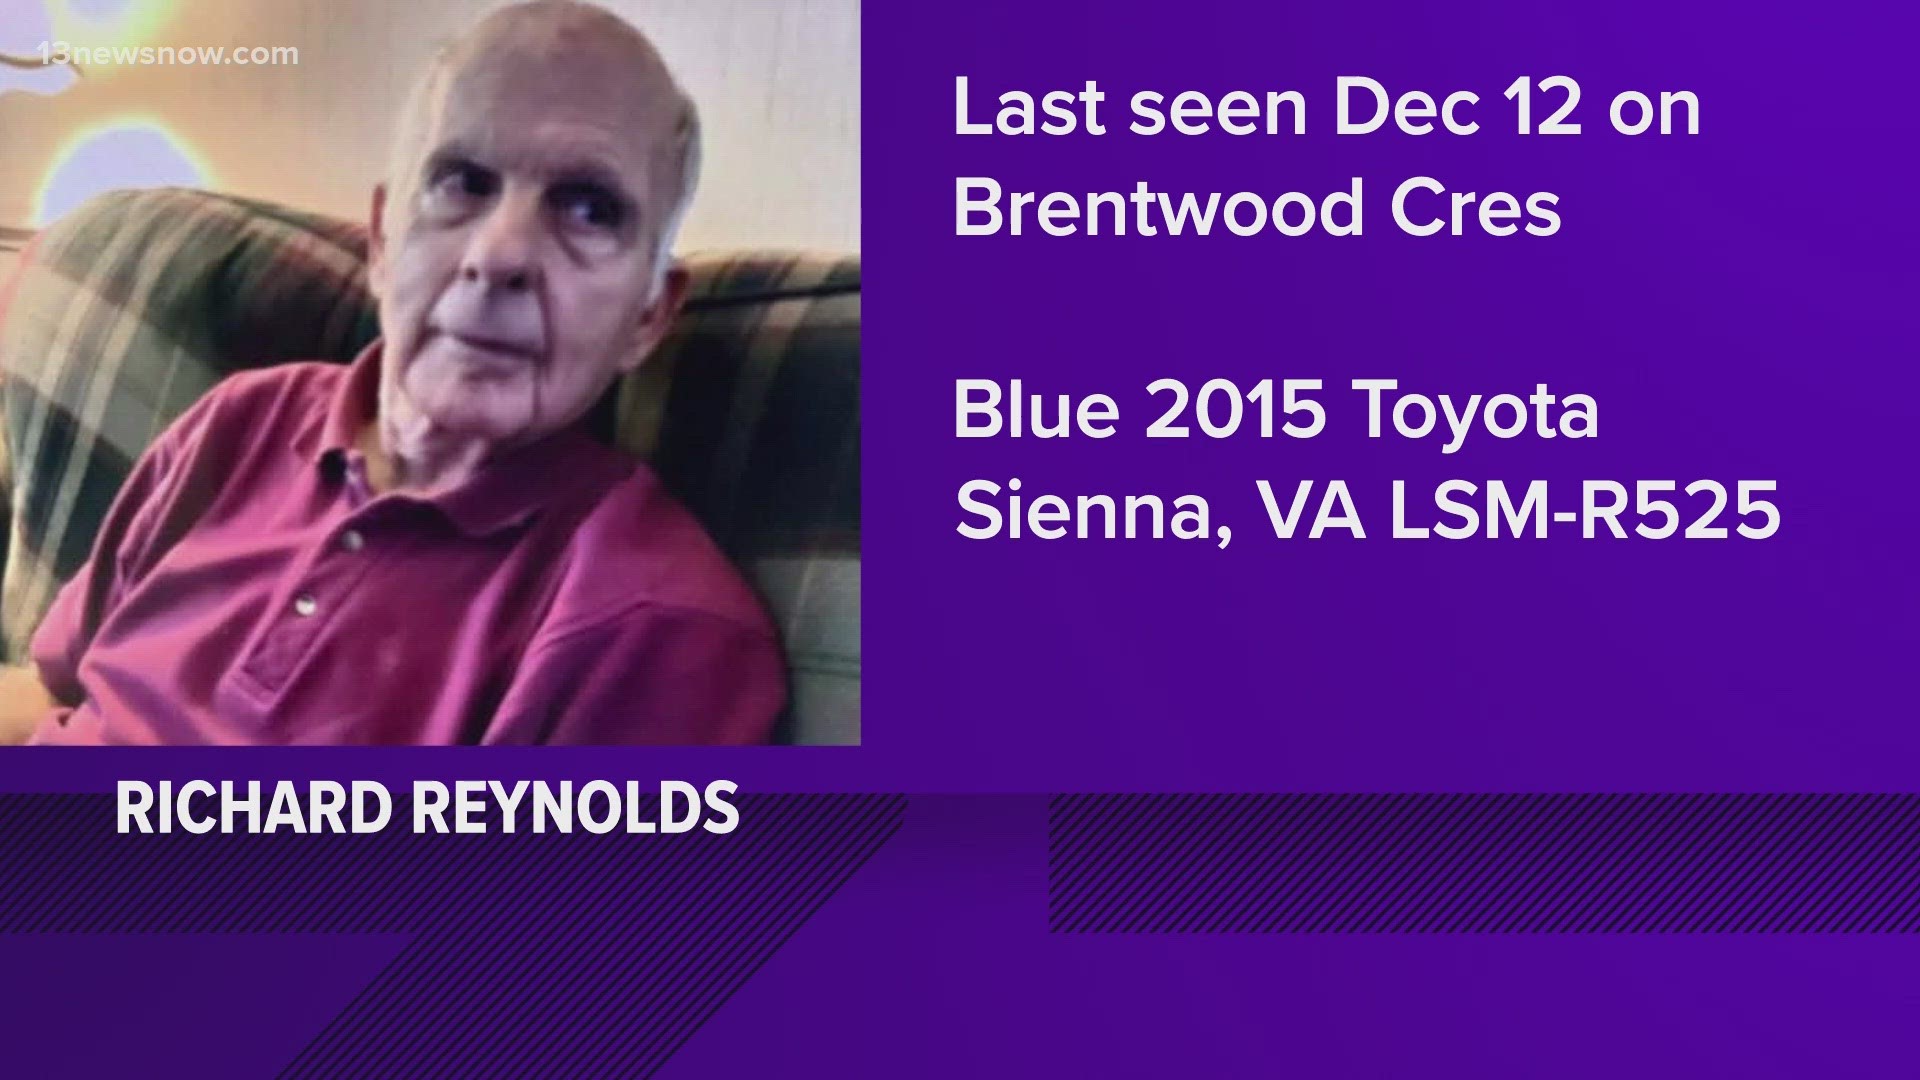 Richard Reynolds was last seen leaving his house on Brentwood Crescent, headed to the BJ's on Virginia Beach Boulevard.